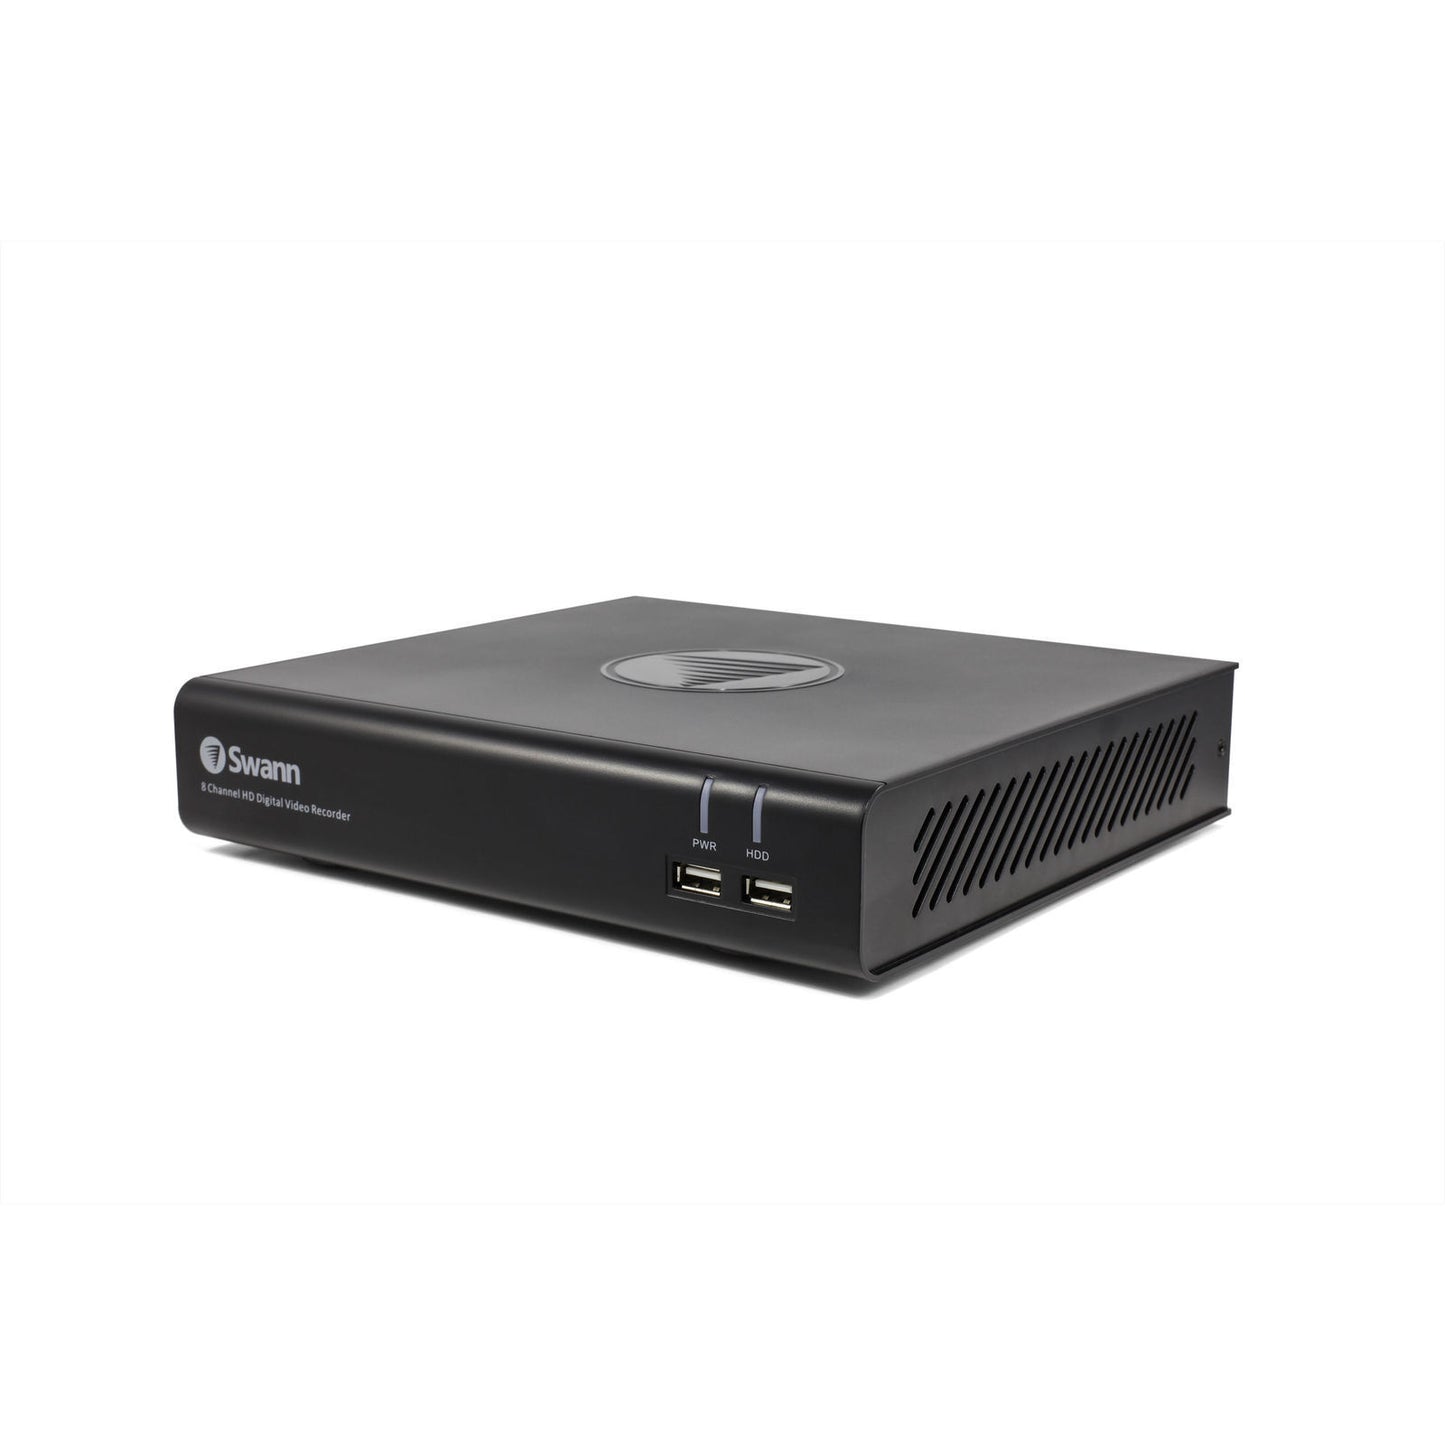 Swann DVR8-4480 8 Channel 1080p Recorder with 2TB Hard Drive